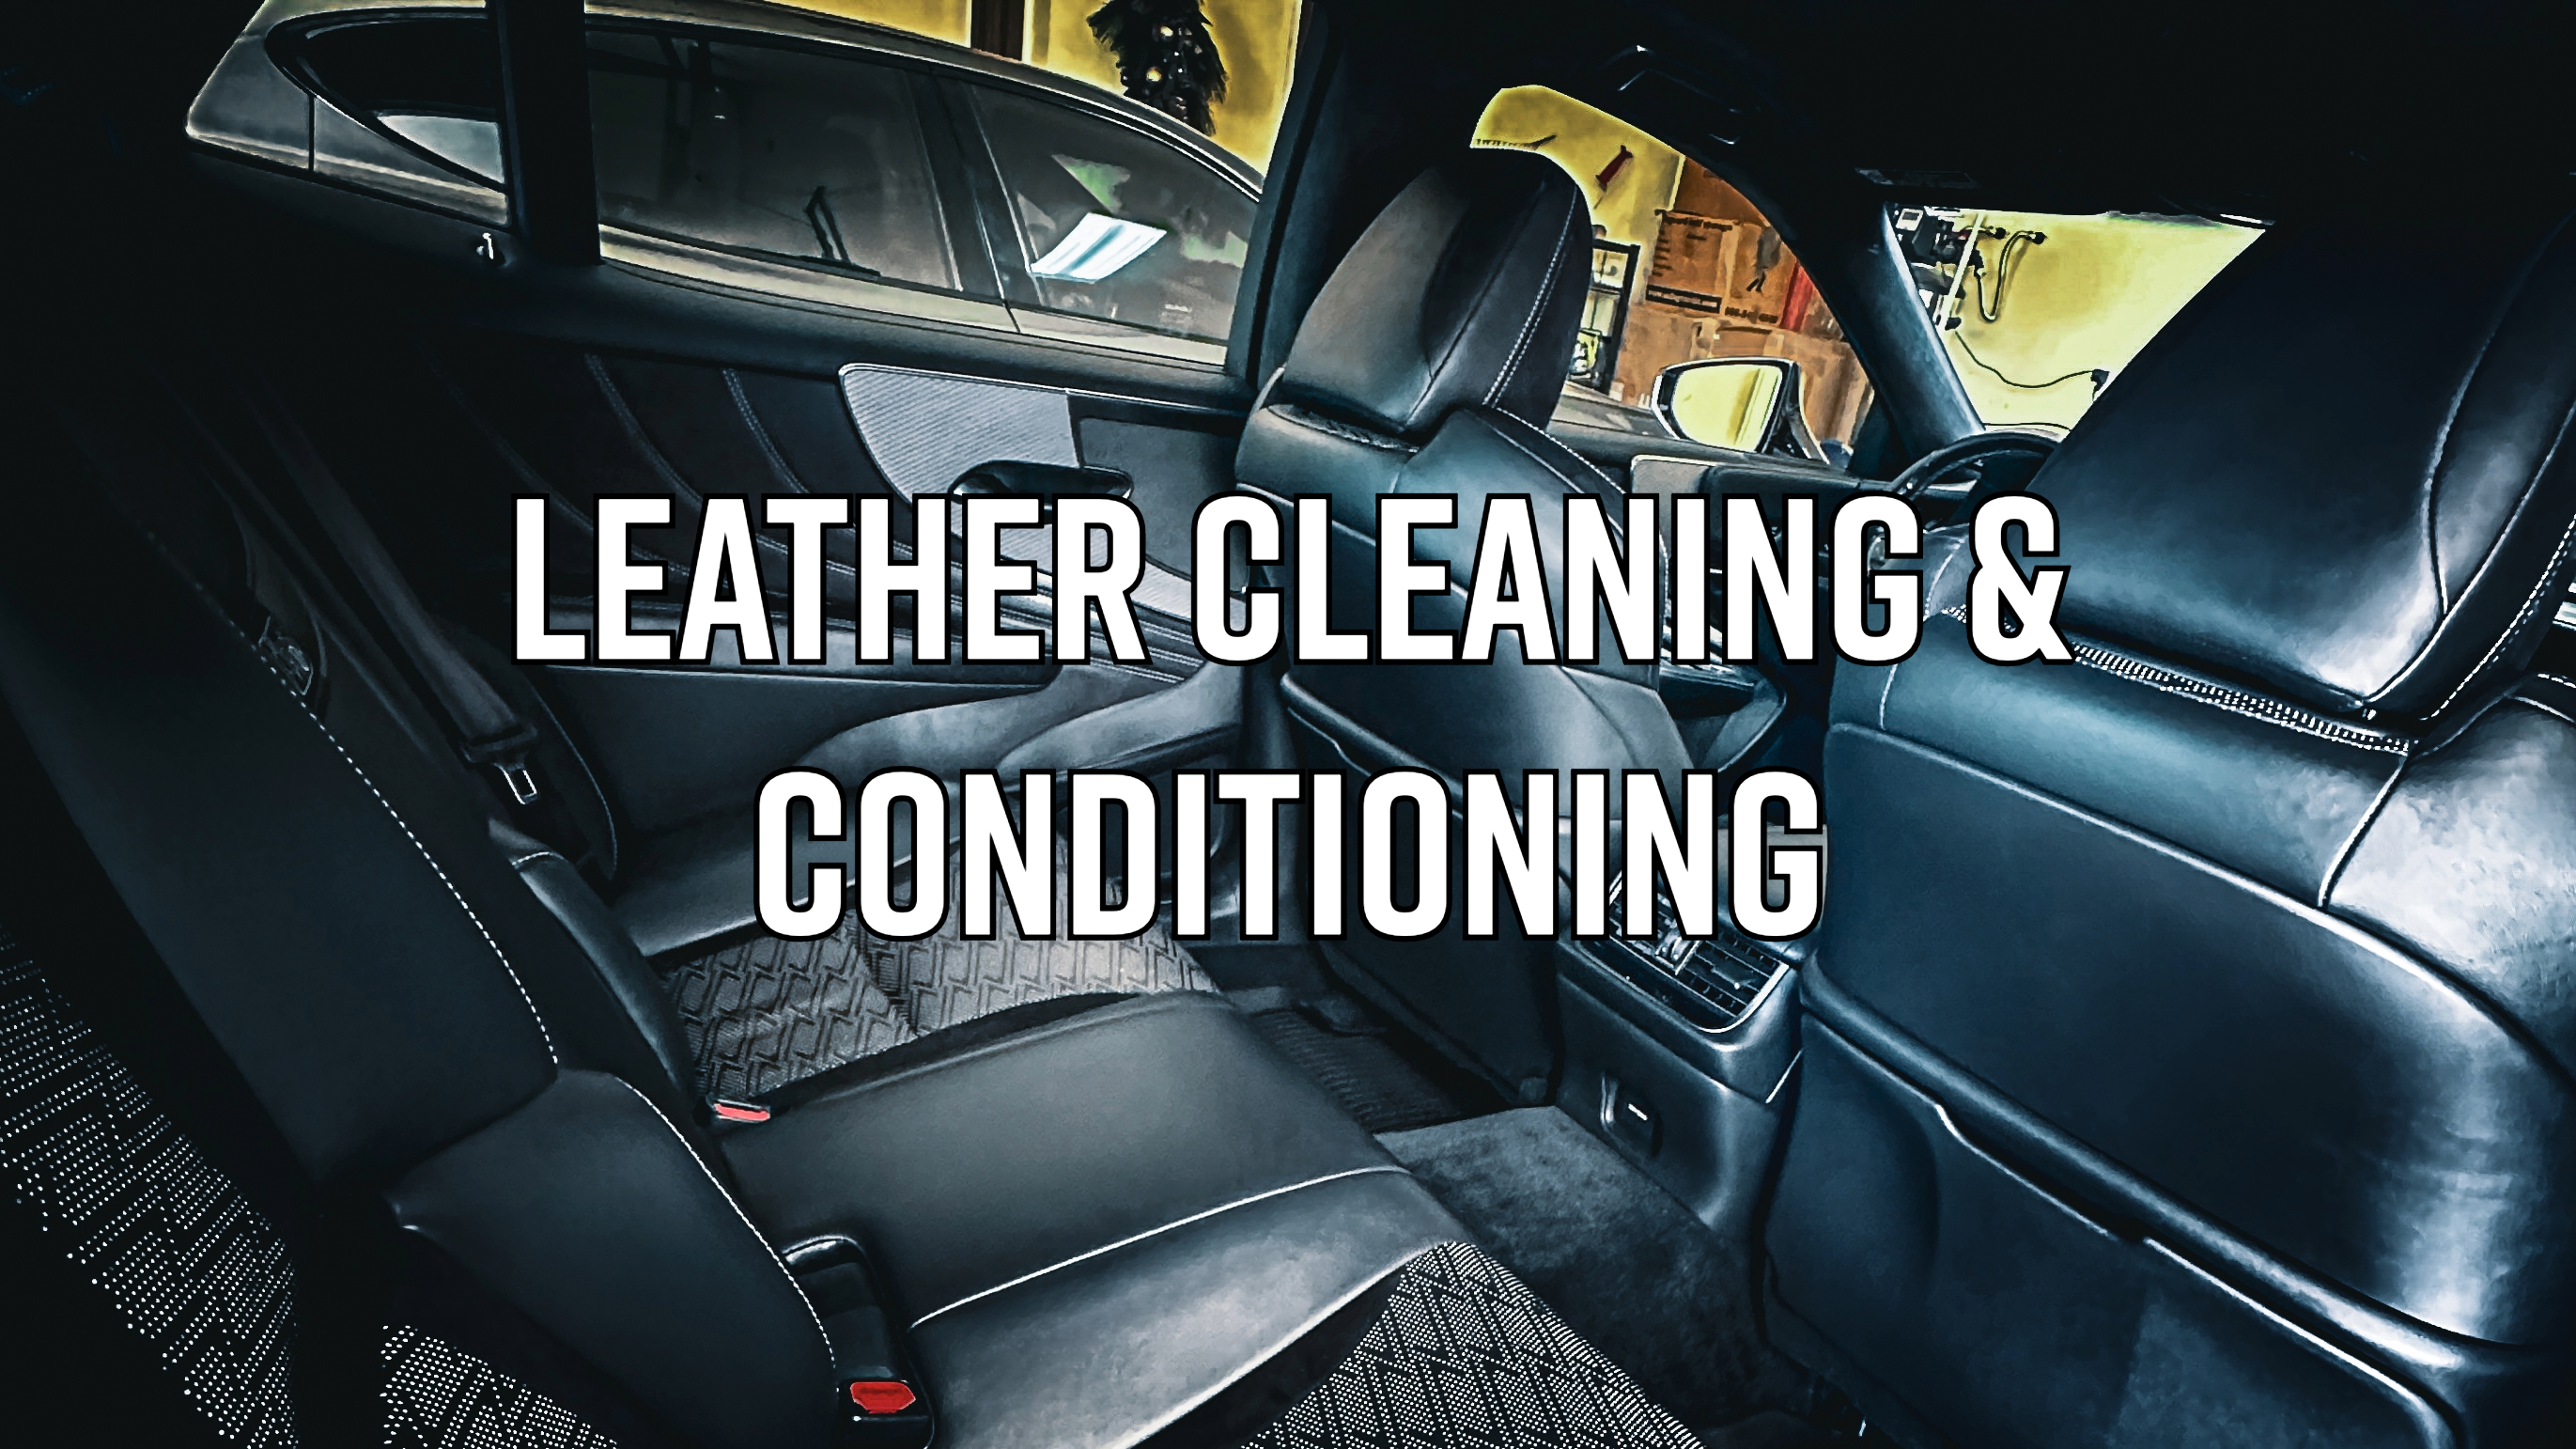 El Paso Detailing - Leather Cleaning & Conditioning